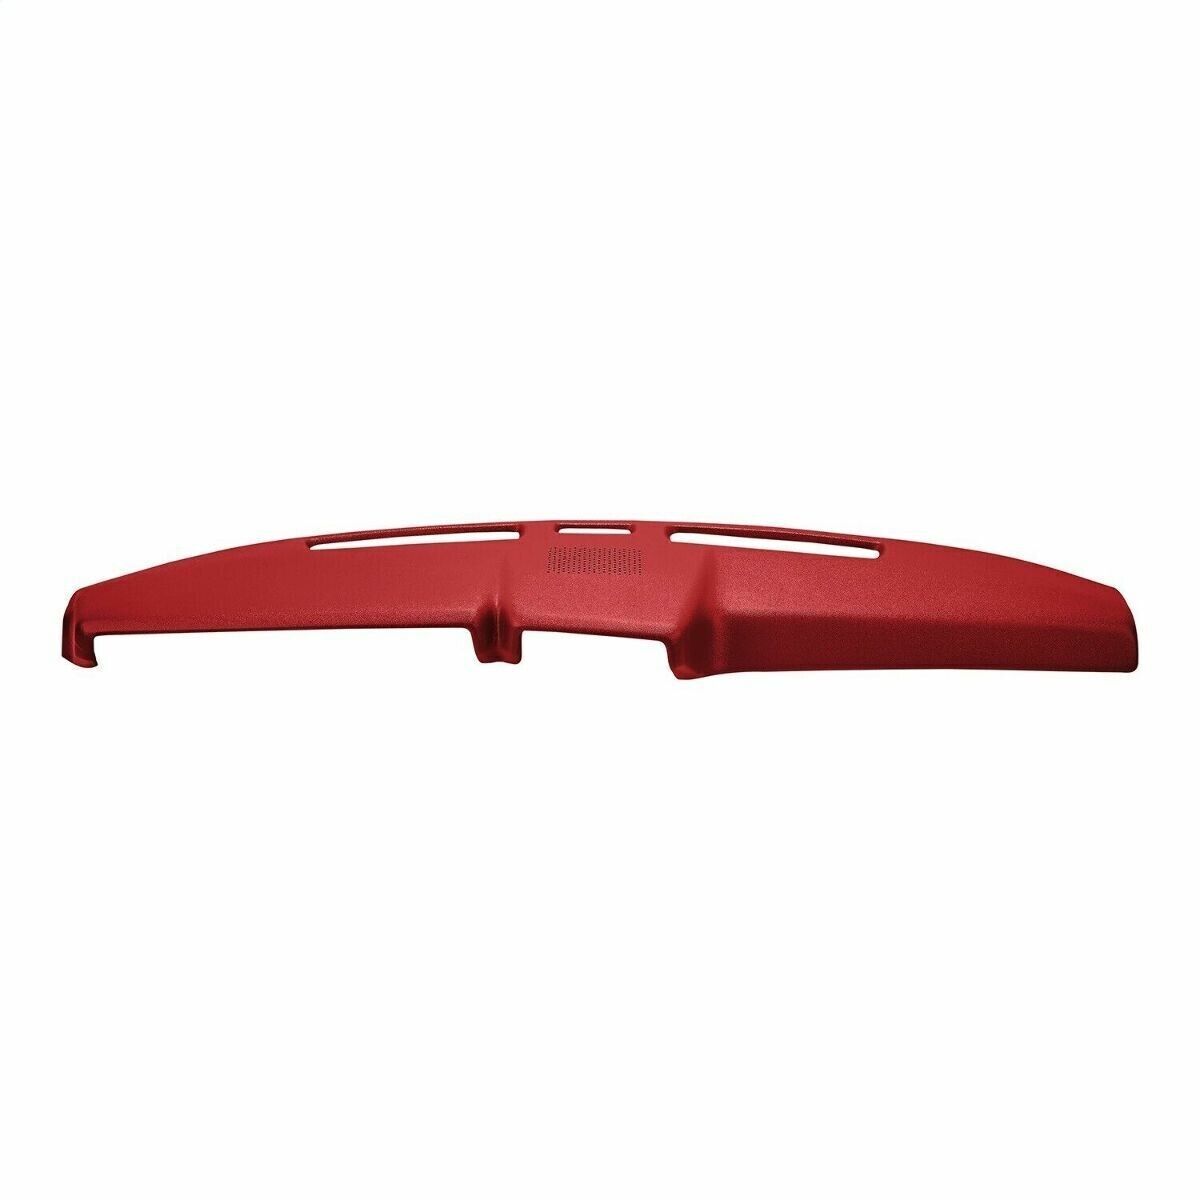 Coverlay Red Dash Cover 12-108-RD Fits 80-86 F150 F250 F350 Bronco